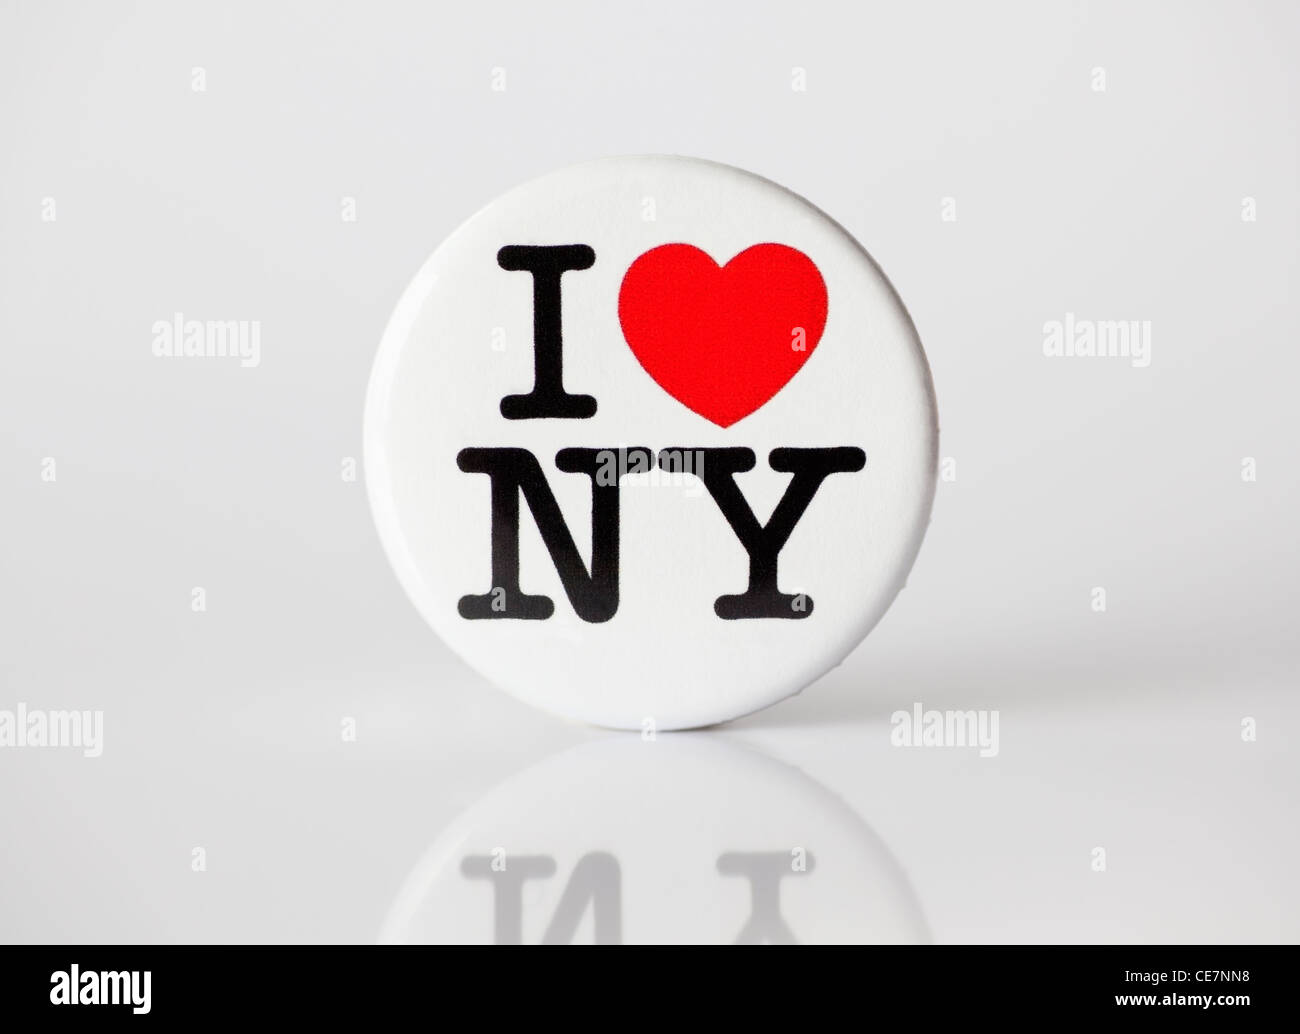 Muenster, Germany - January 28, 2012: Picture shows the famous 'i love ny' logo from the city of new york, printed on a badge. Stock Photo